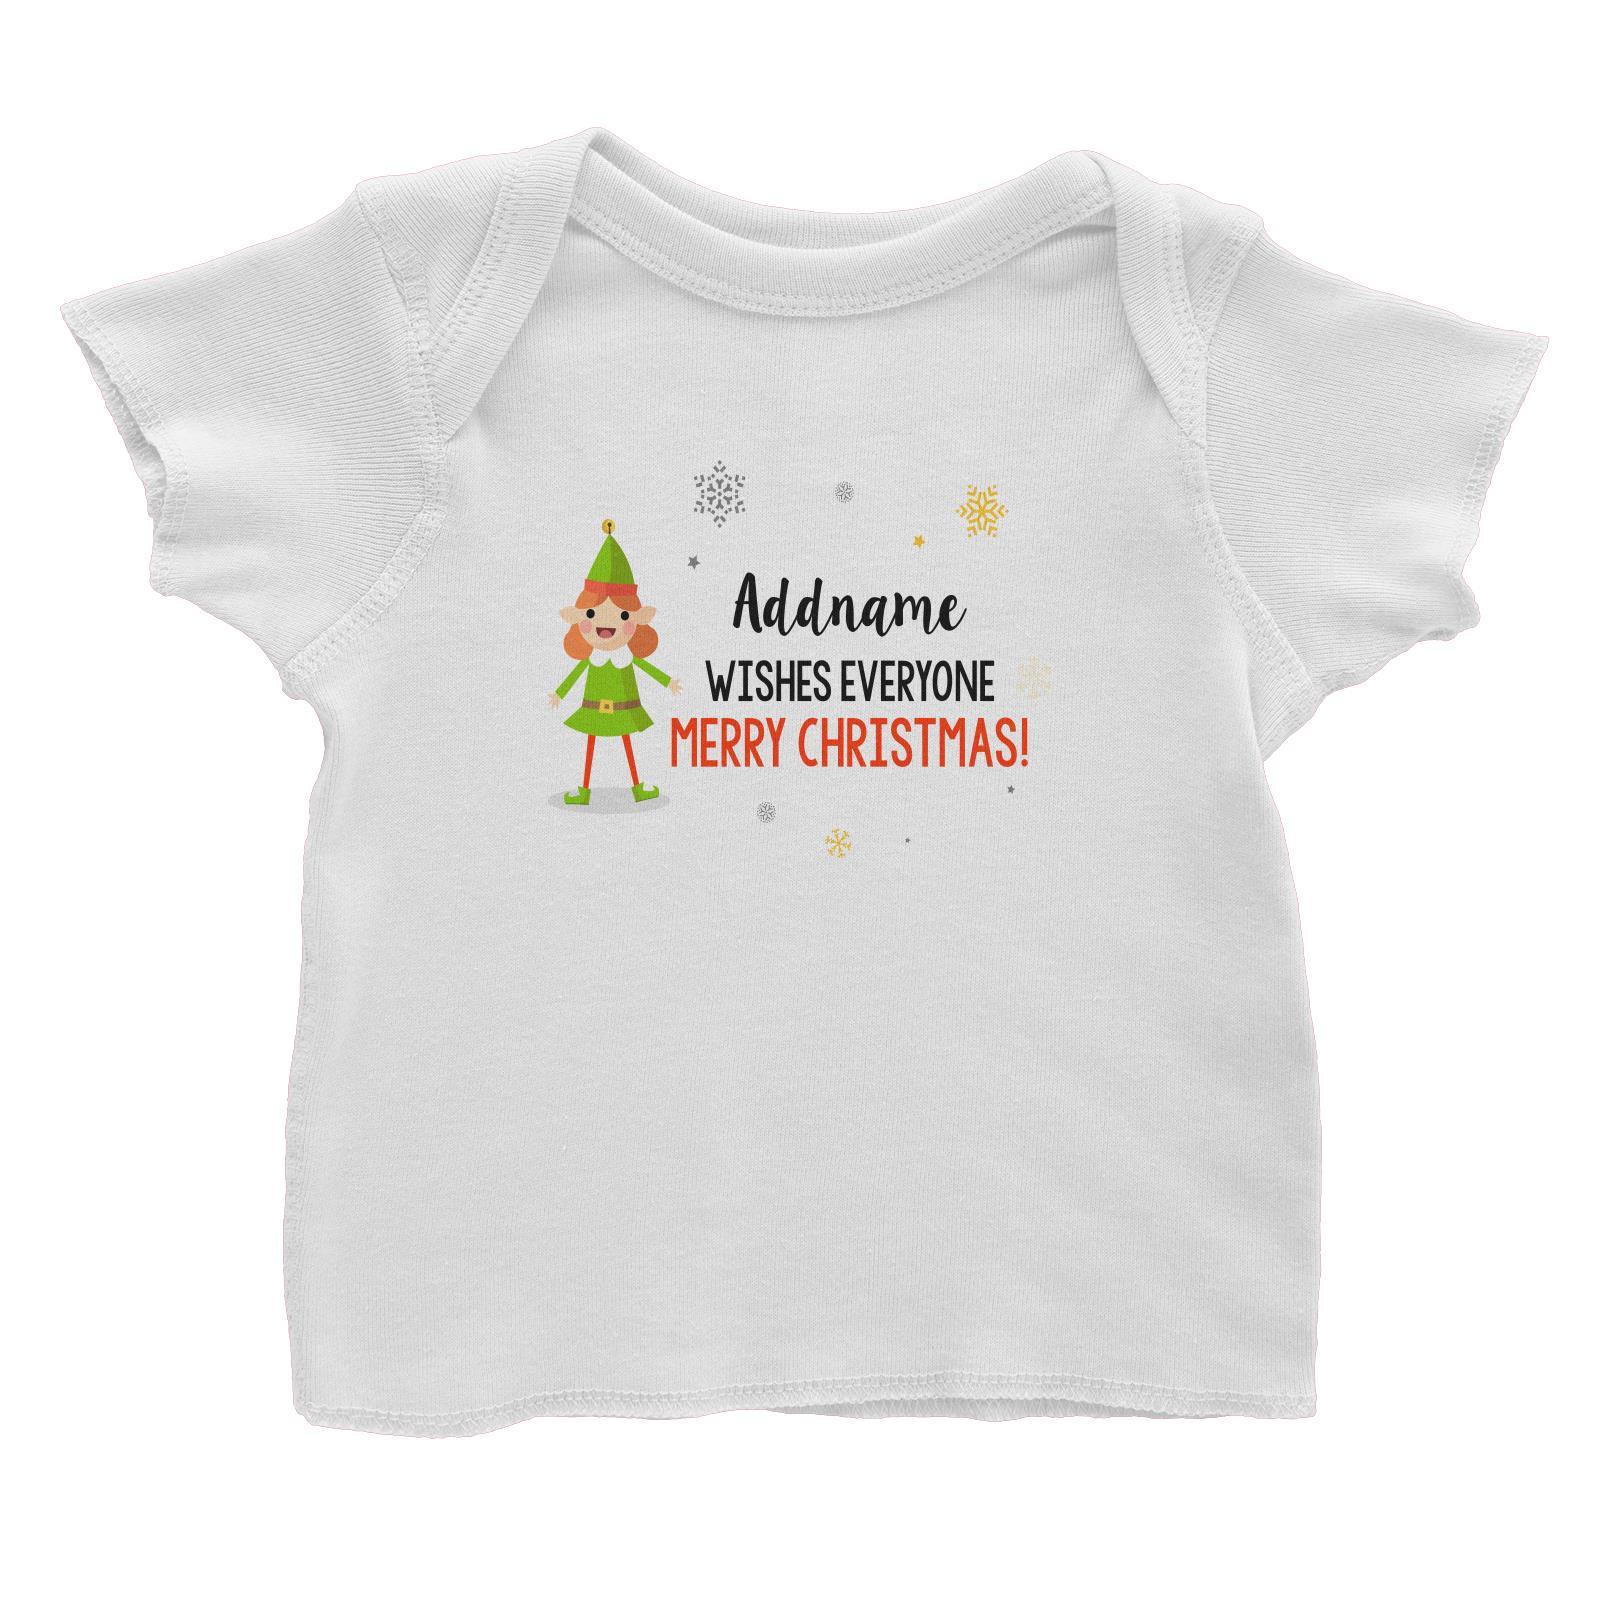 Cute Elf Girl Wishes Evryone Merry Christmas Addname Baby T-Shirt  Matching Family Personalizable Designs